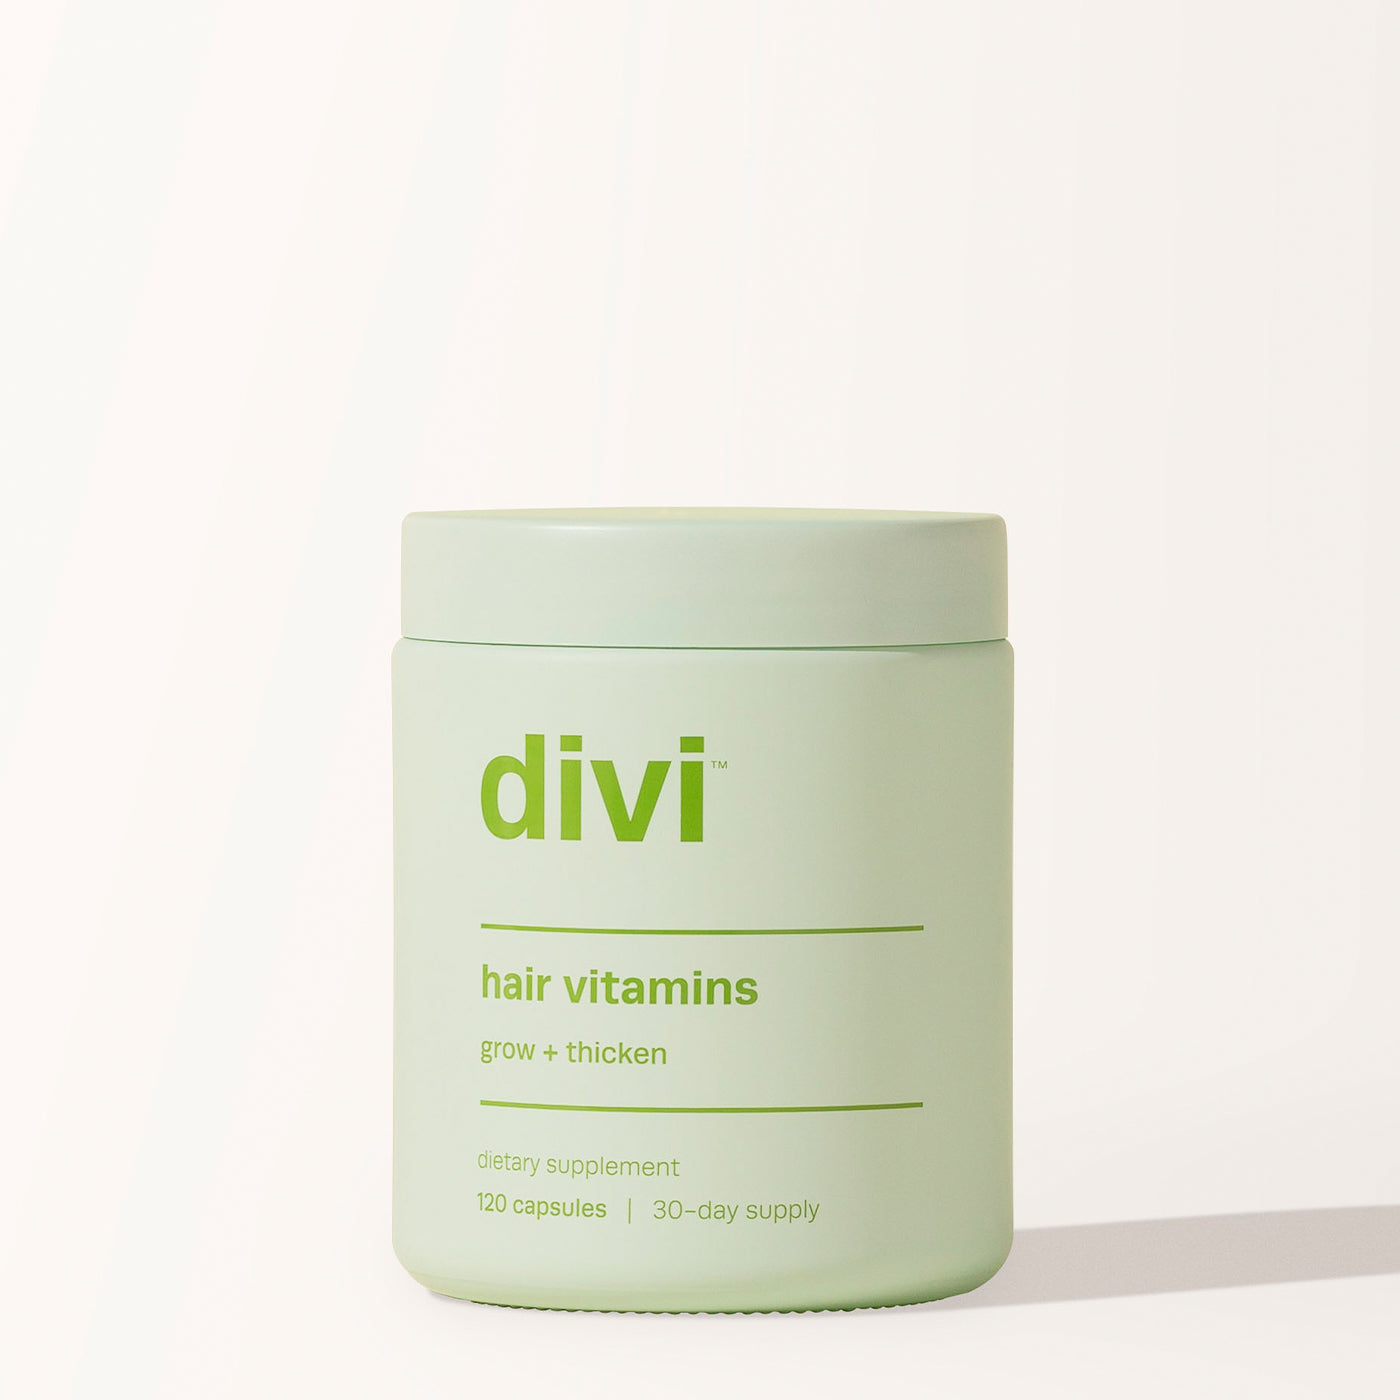 Divi's Scalp Serum Claims to Spark Hair Growth—We Put it to the Test